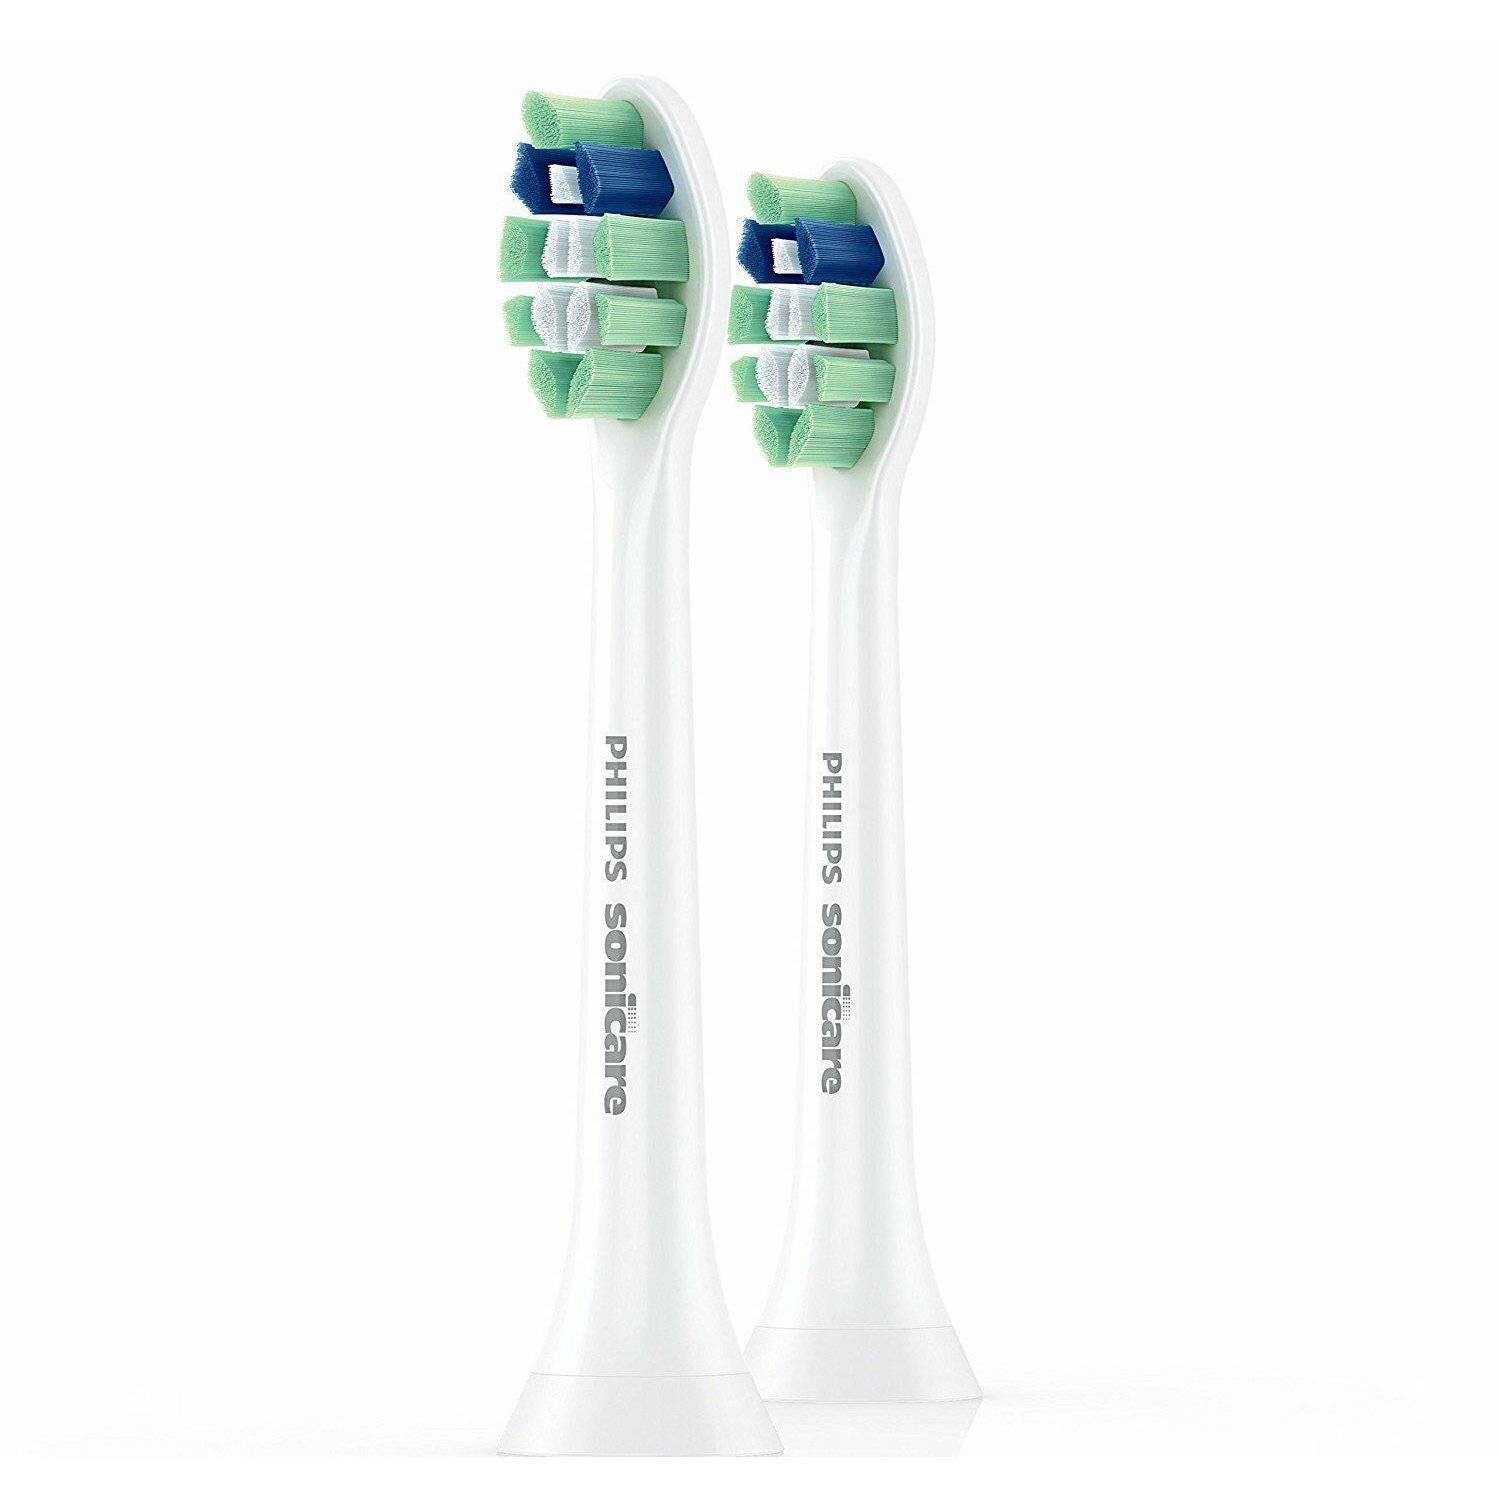 Philips ProResults White Replacement Heads - Long Dense Bristles - Pack of 2 - Healthxpress.ie